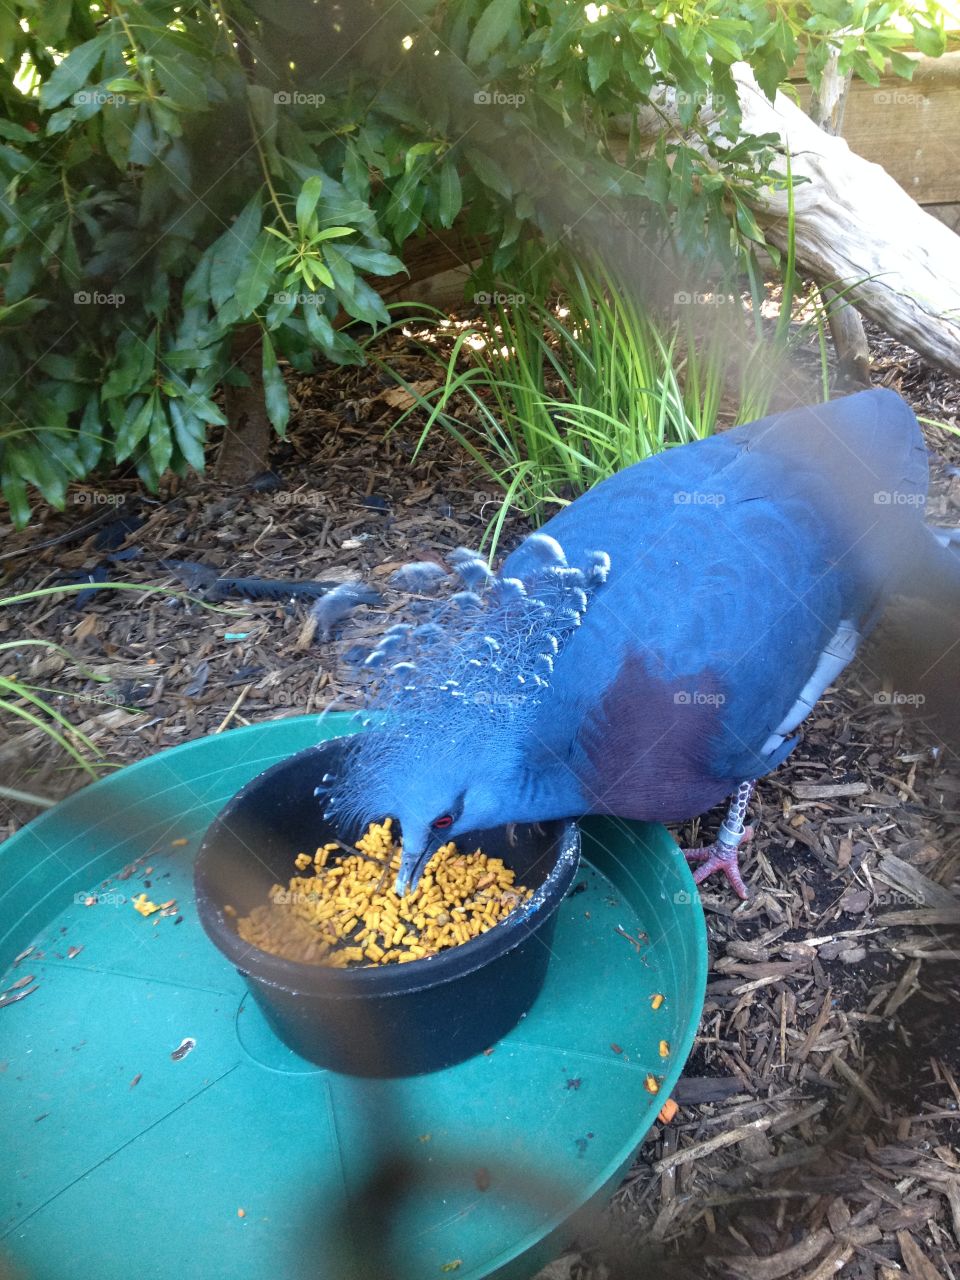 A species of pigeon at the Asheboro Zoo